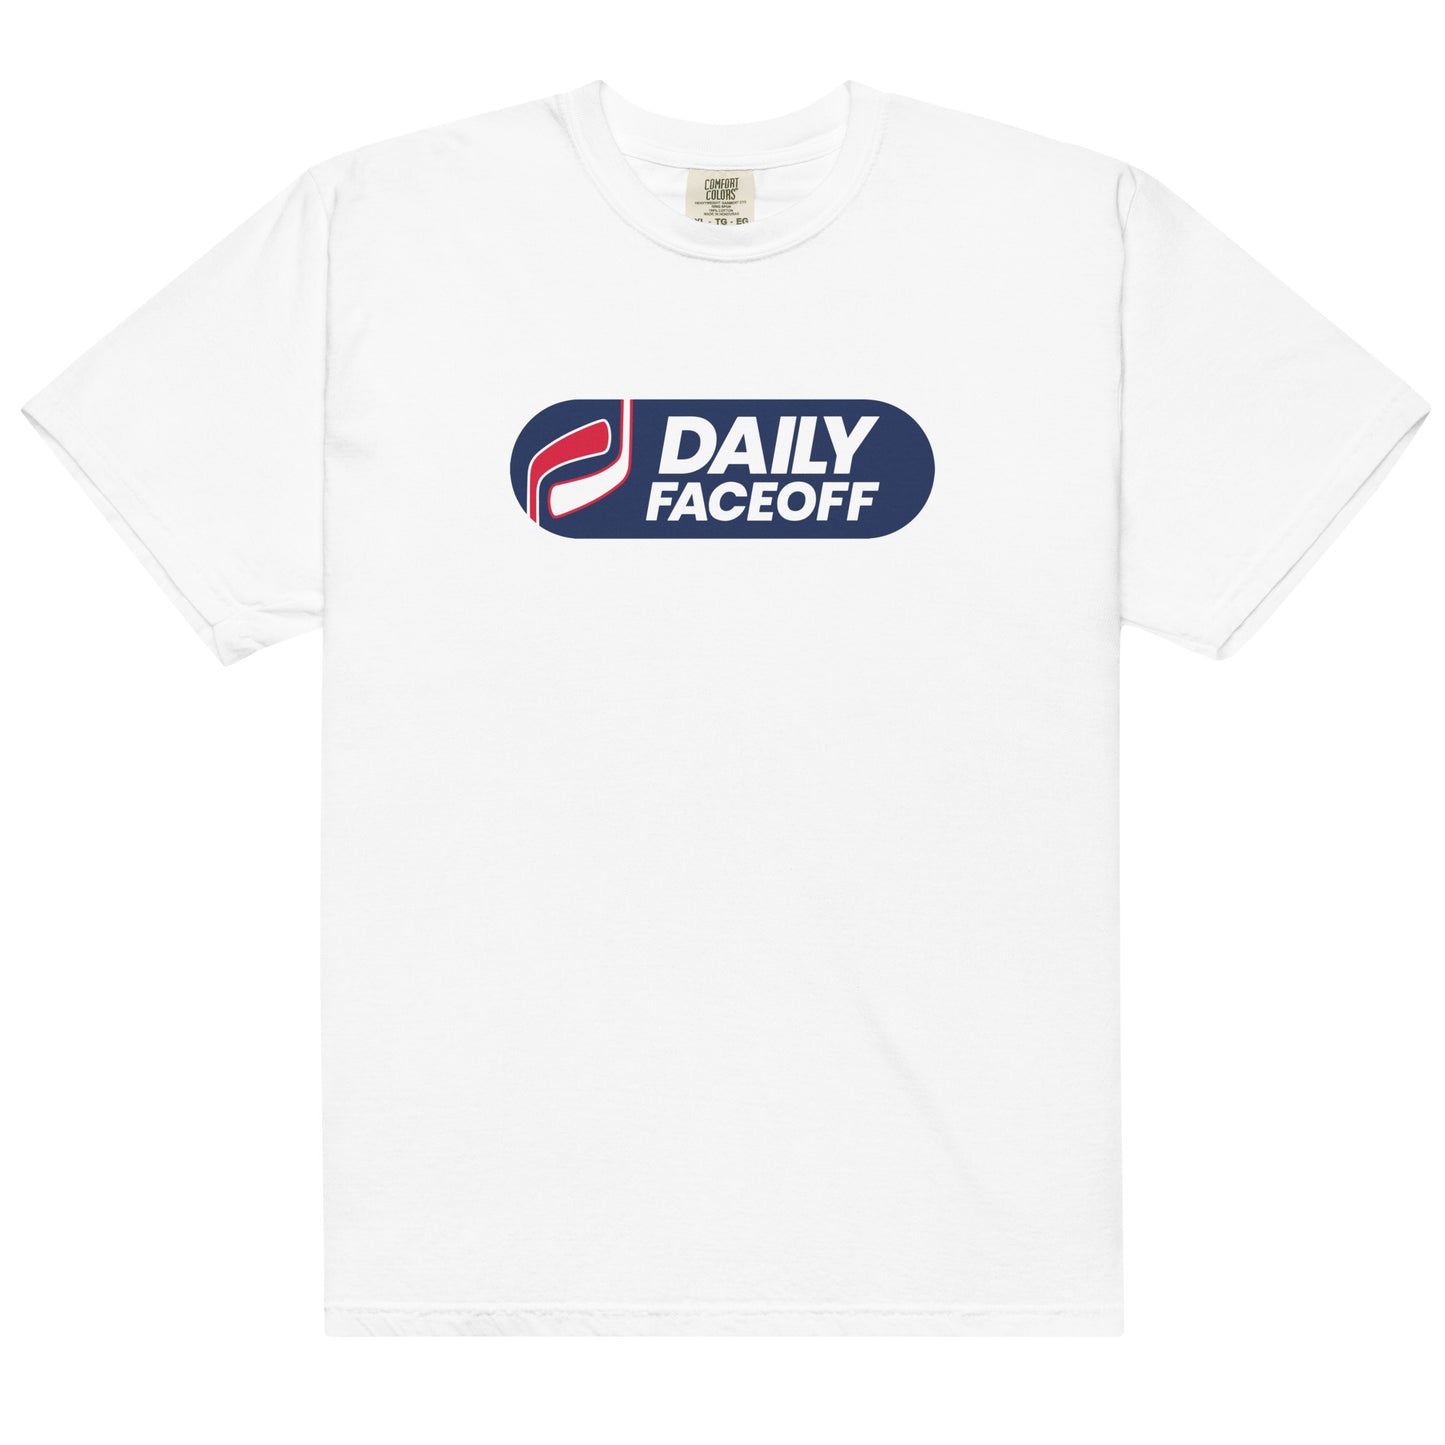 THE CLASSICS - Daily Faceoff Full Chest T-Shirt